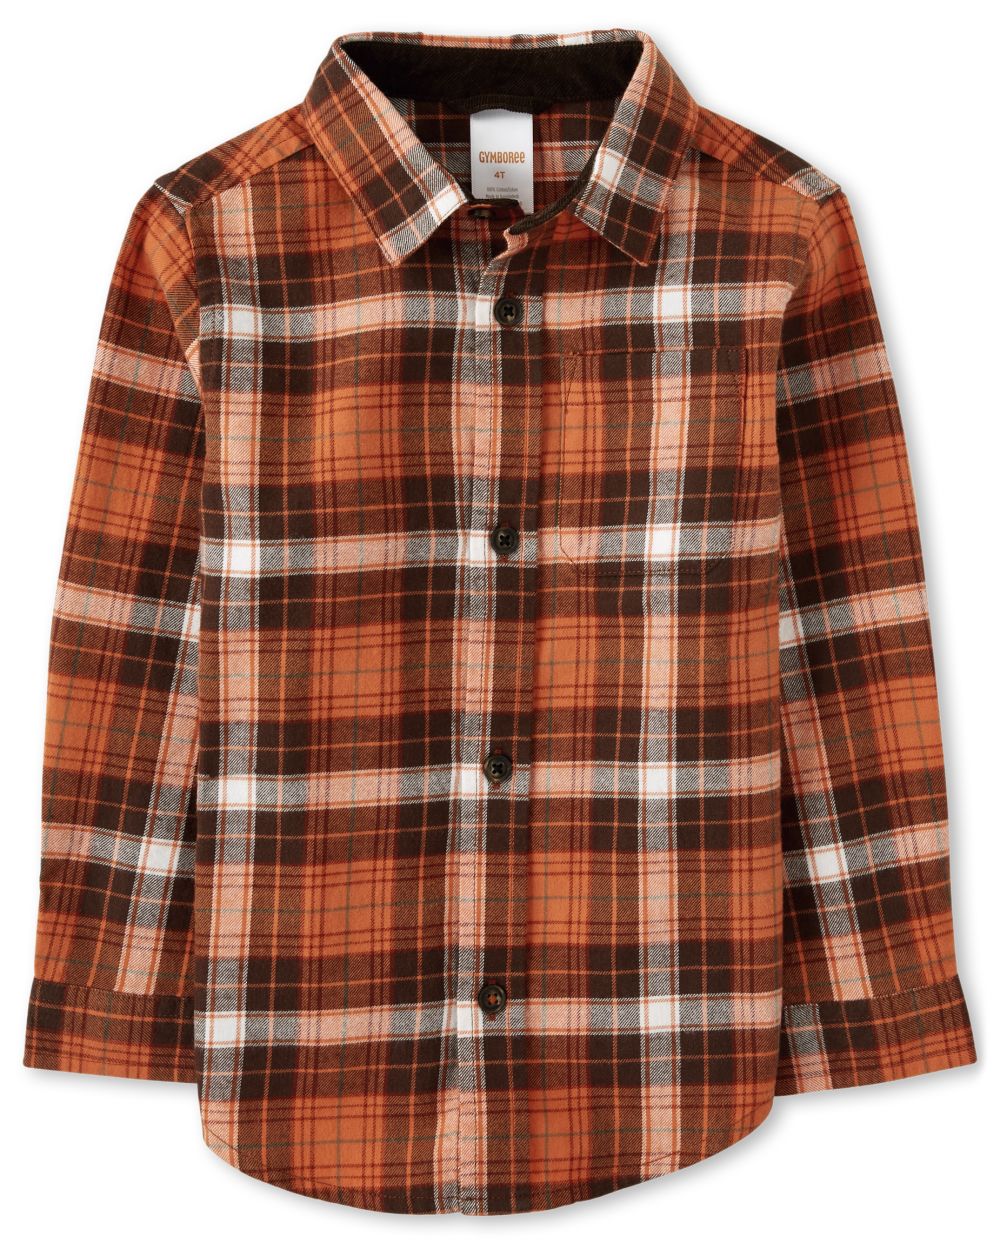 matching sibling fall outfits, brown and orange plaid button up shirt